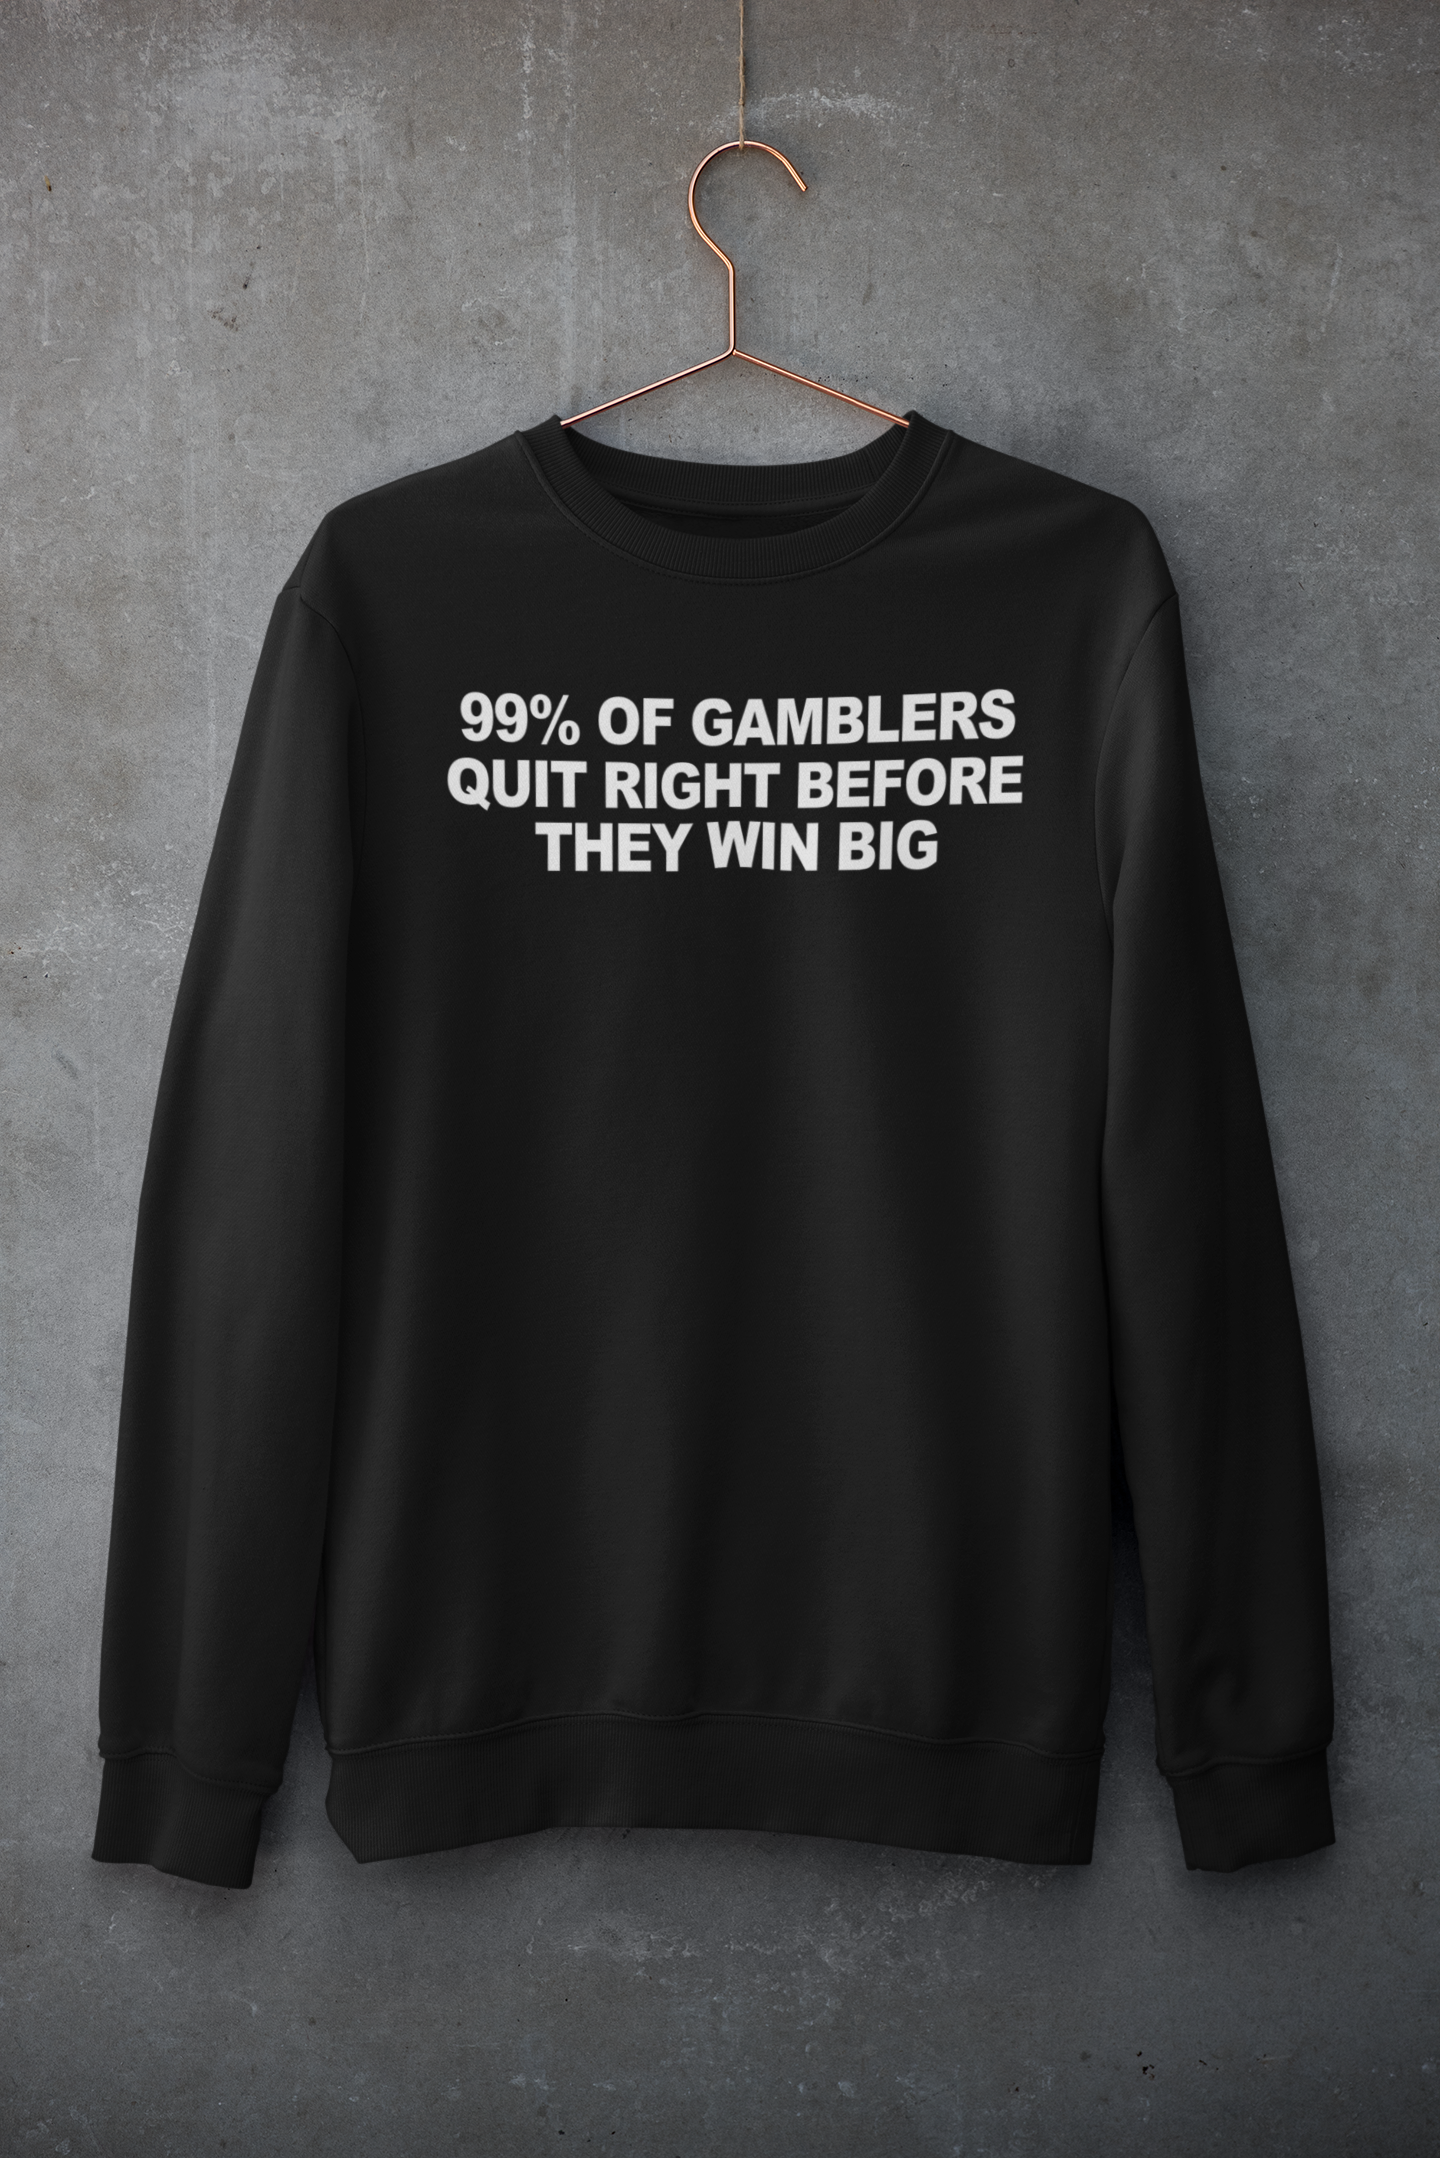 99% Of Gamblers Quit Right Before They Win Big Hoodie